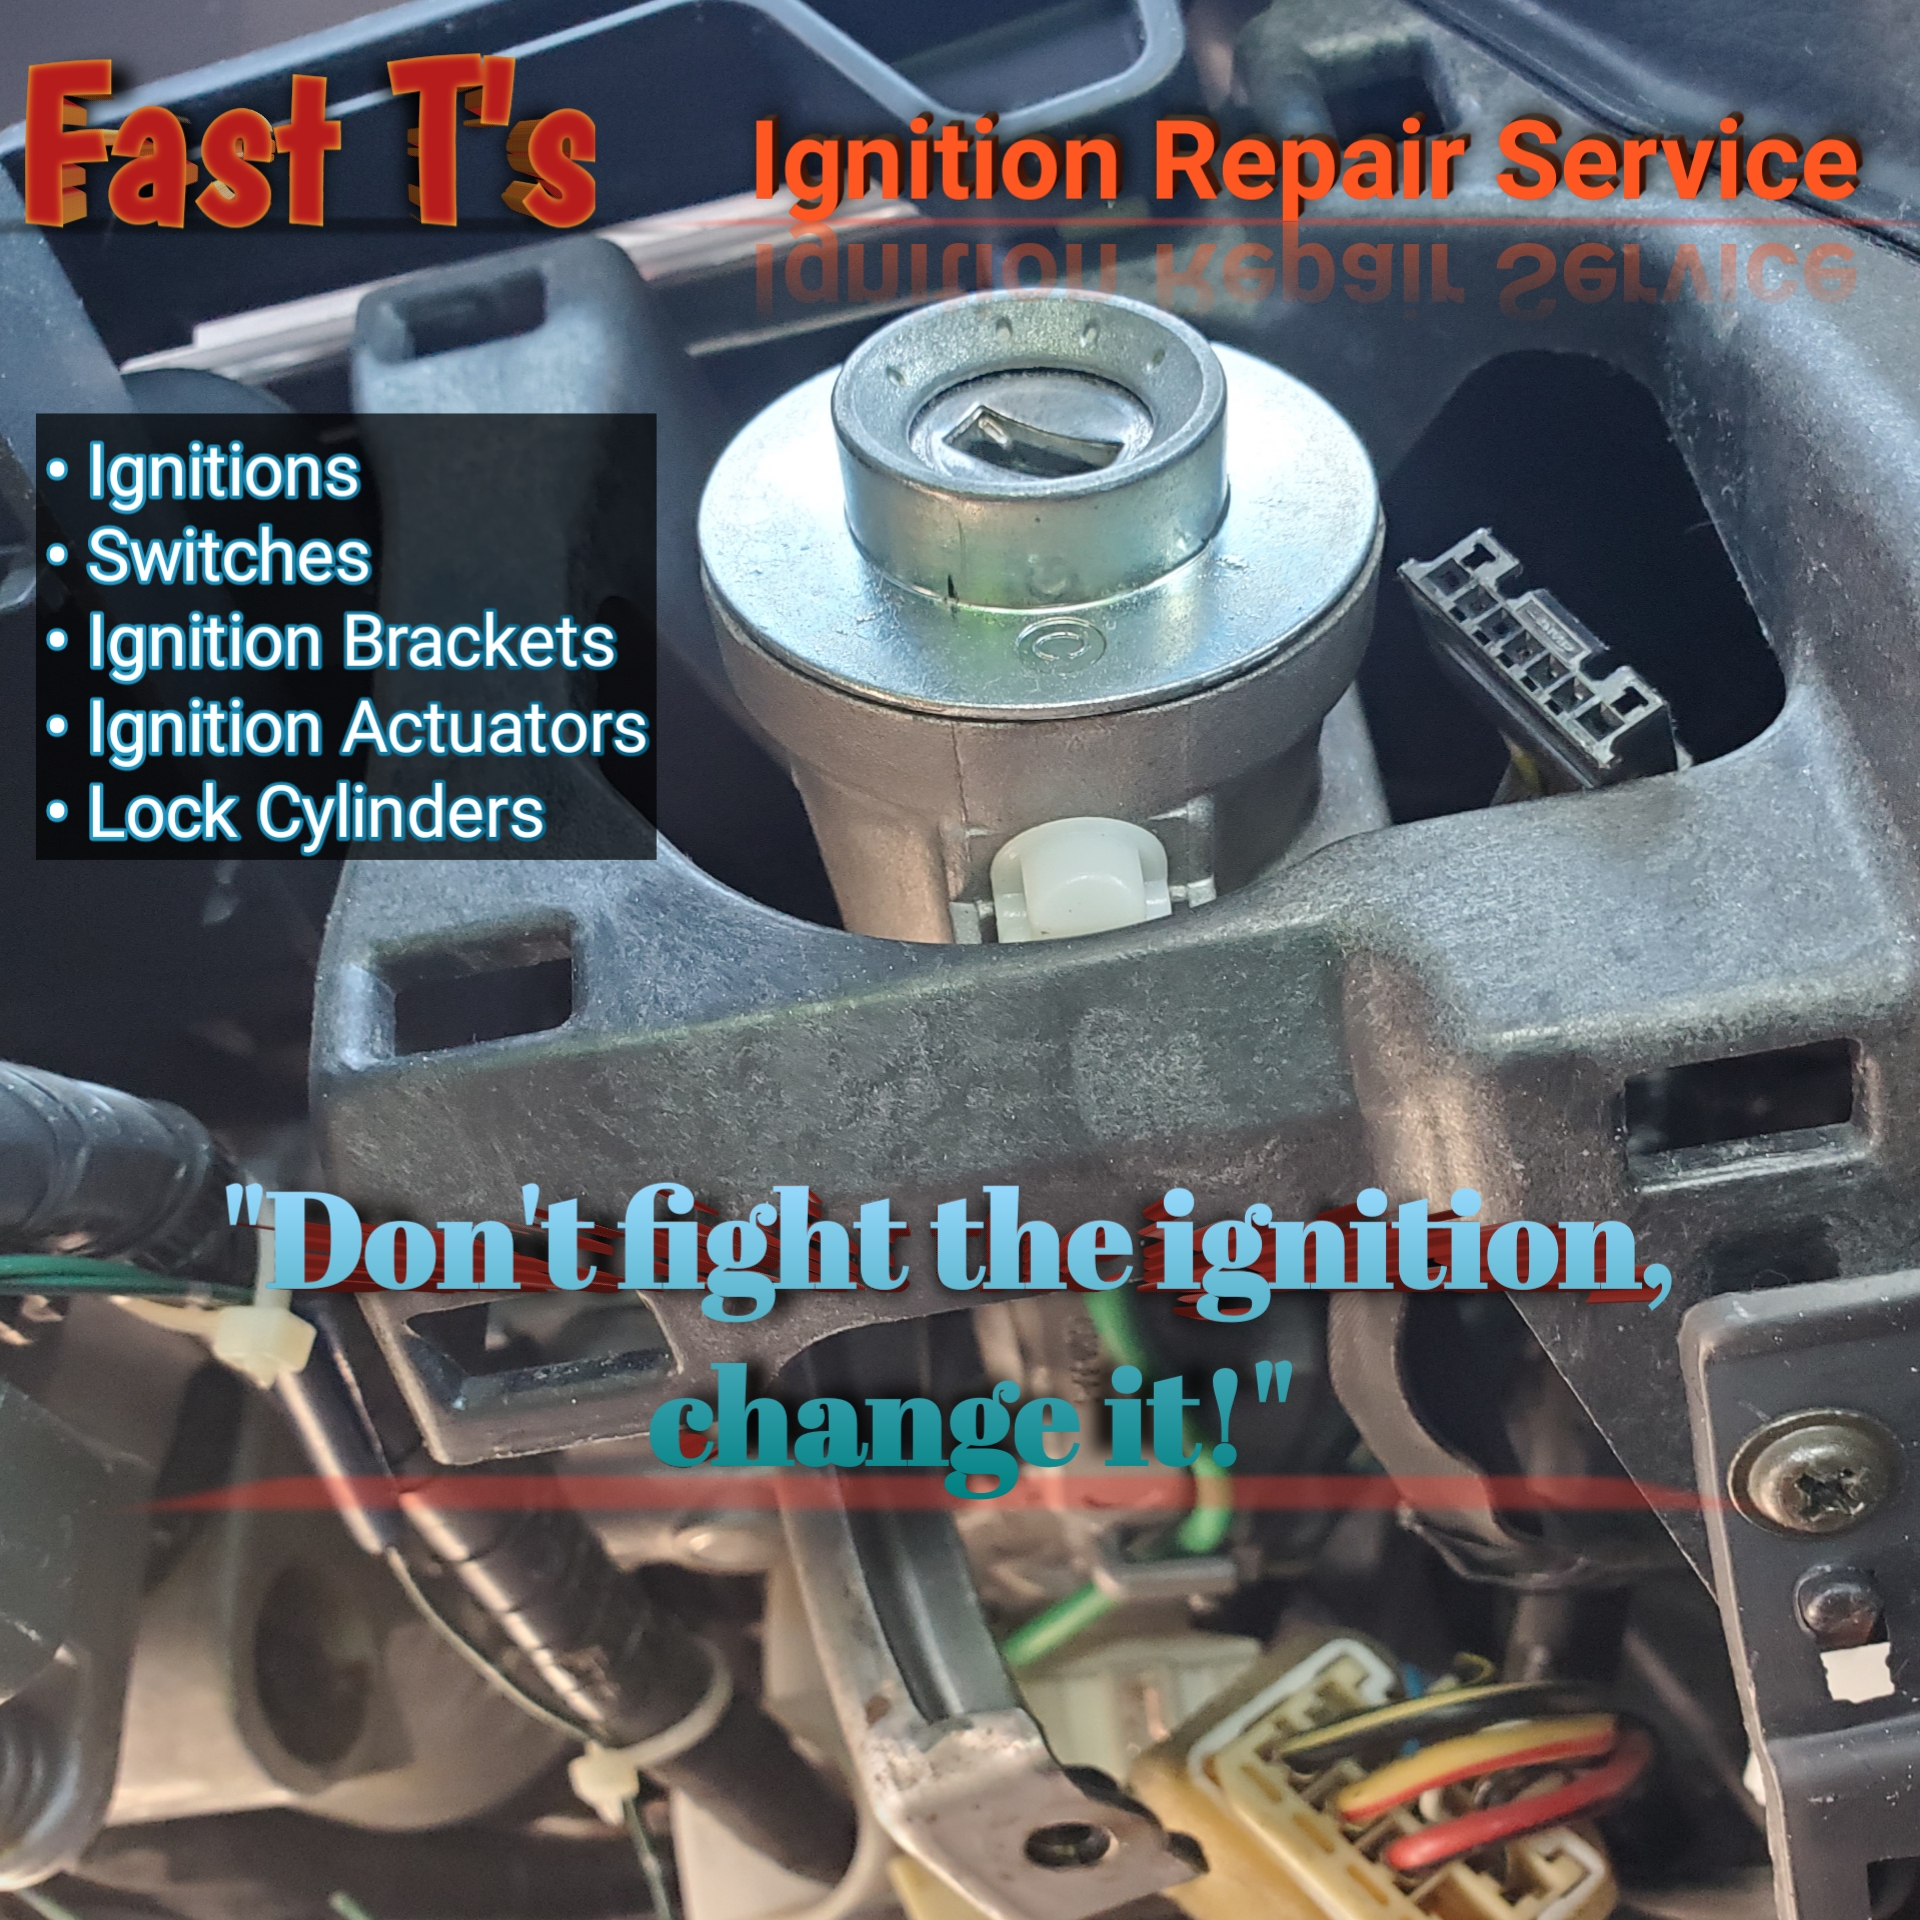 "Don't fight the ignition, have Fast T's Change it!